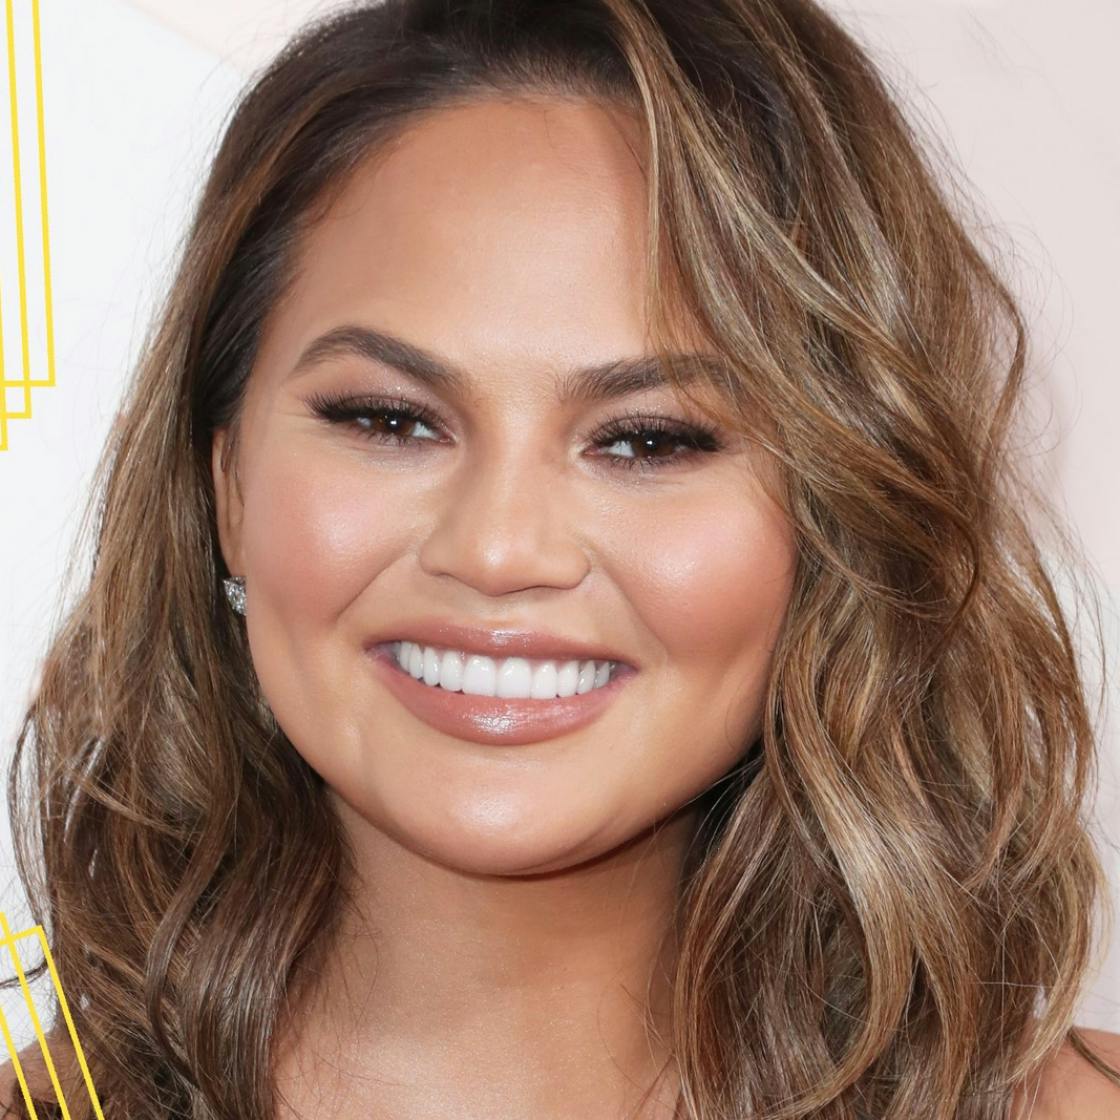 L'Oreal Instant Highlights delivers Chrissy Teigen hair colour in minutes